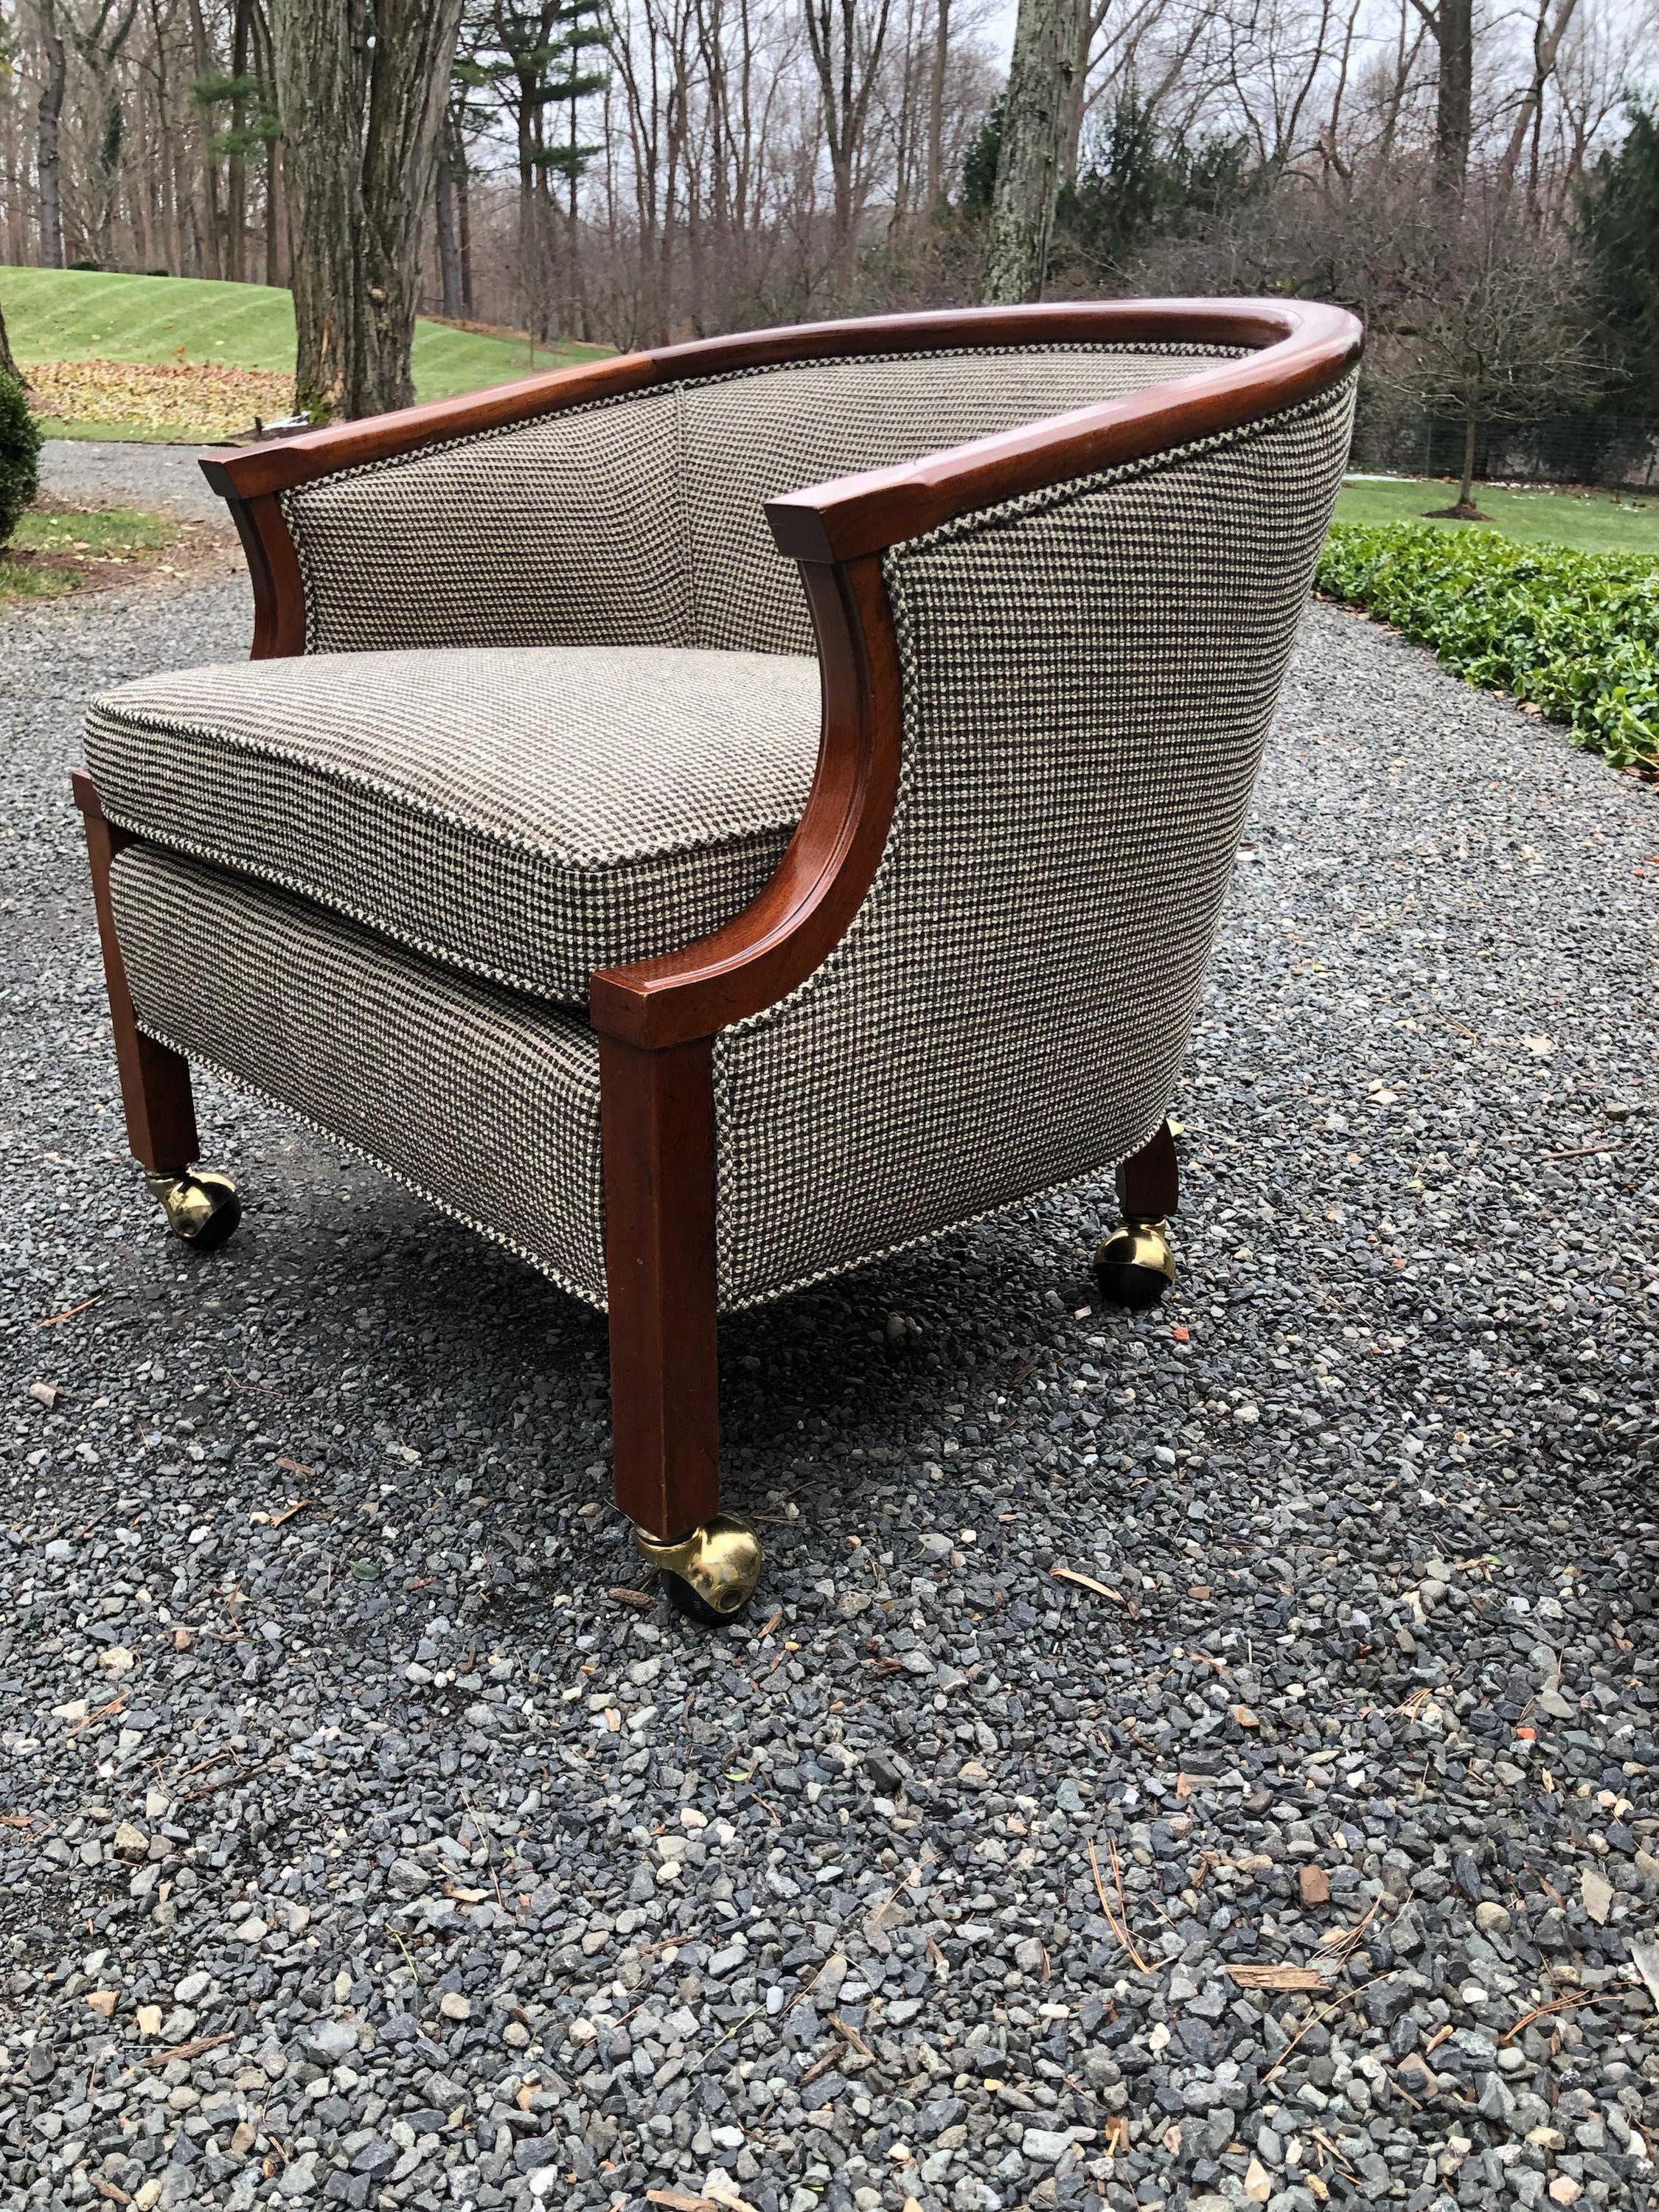 Great pair of midcentury club chairs by John Stuart newly upholstered in a black, taupe and ivory glen plaid wool blend fabric. The mahogany frames have been professionally polished and casters are original. Seat height is 17” seat interior width